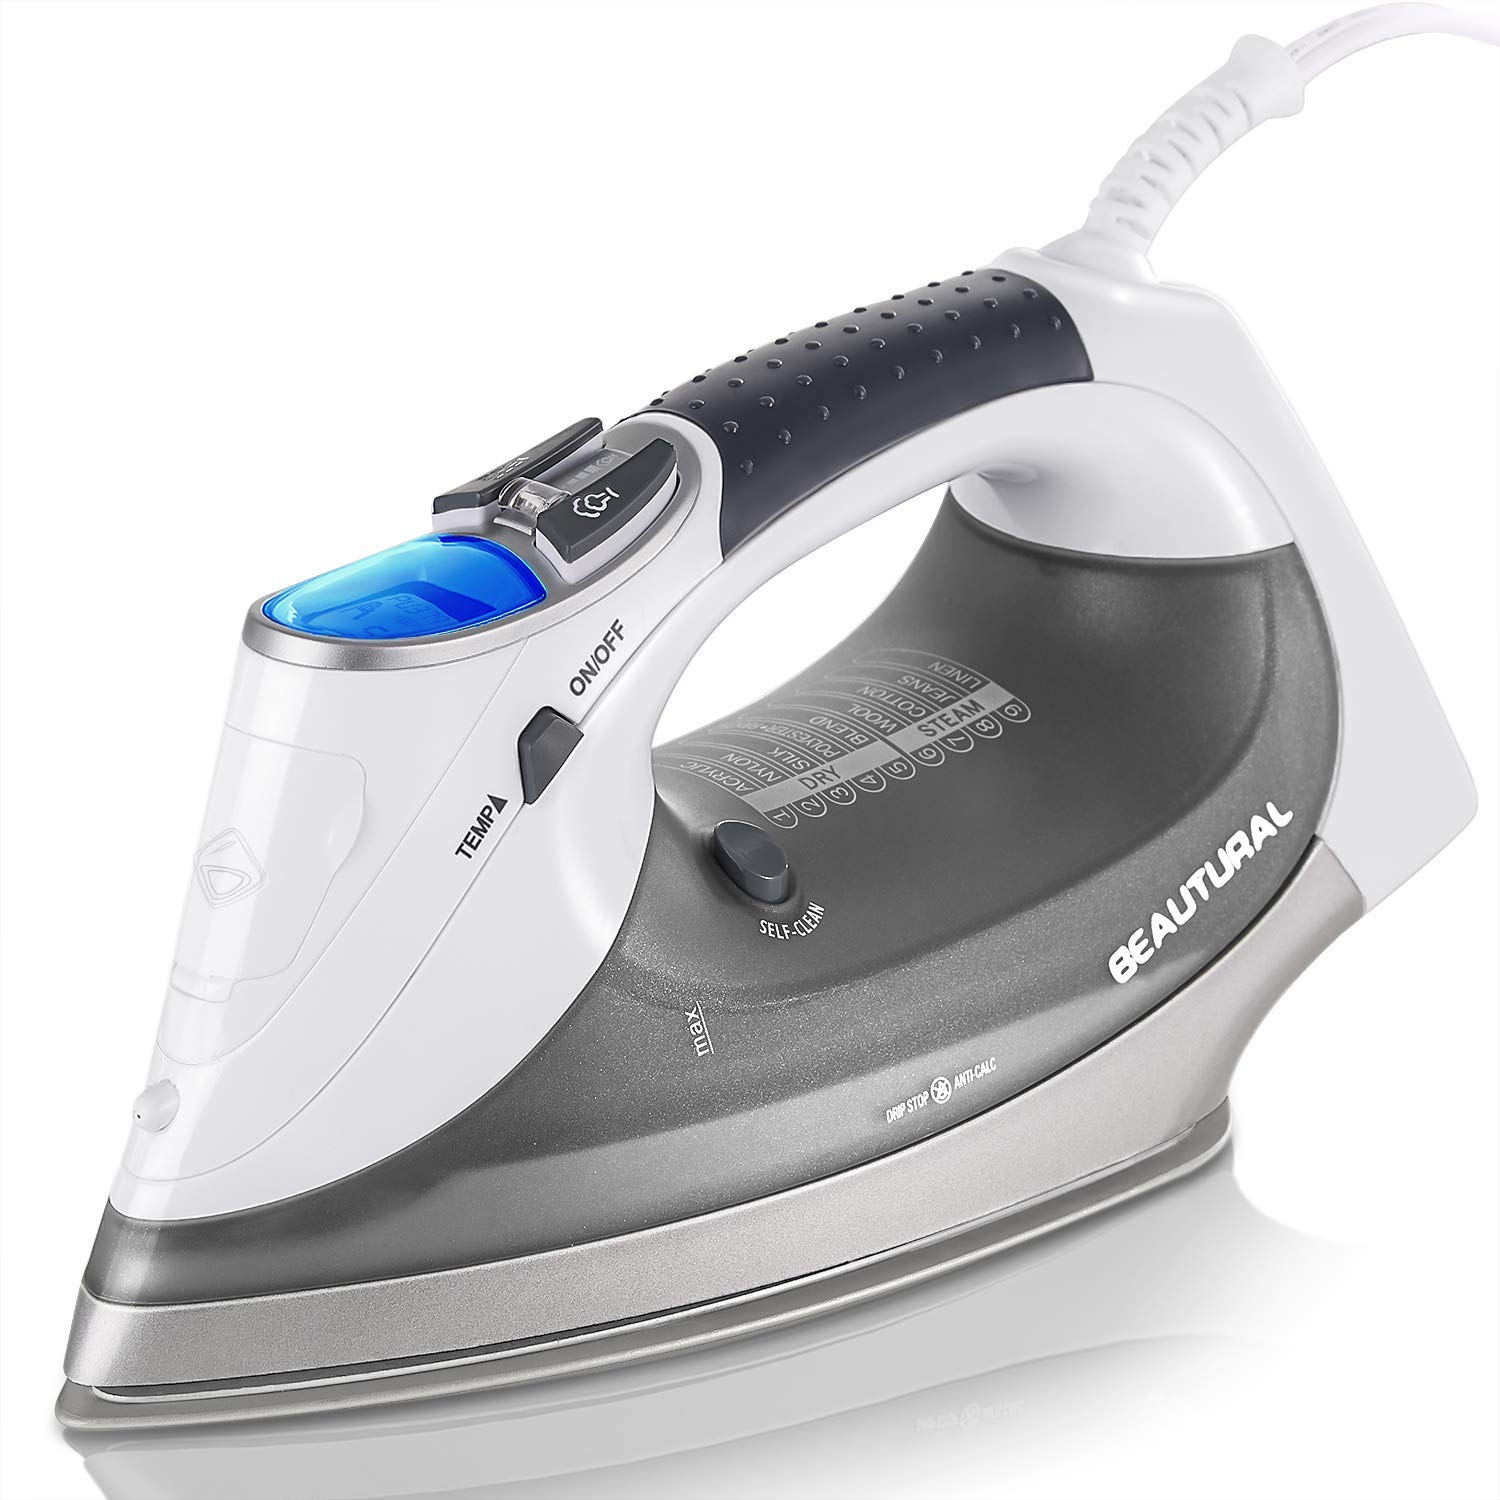 Anti Scale Anti-Drip Self Cleaning & Auto Shut Off Function 260ml Large Water Tank 2500W iTvanila Steam Iron with Advanced Ceramic Soleplate 5 Temperature Control Modes 180g Steam Boost